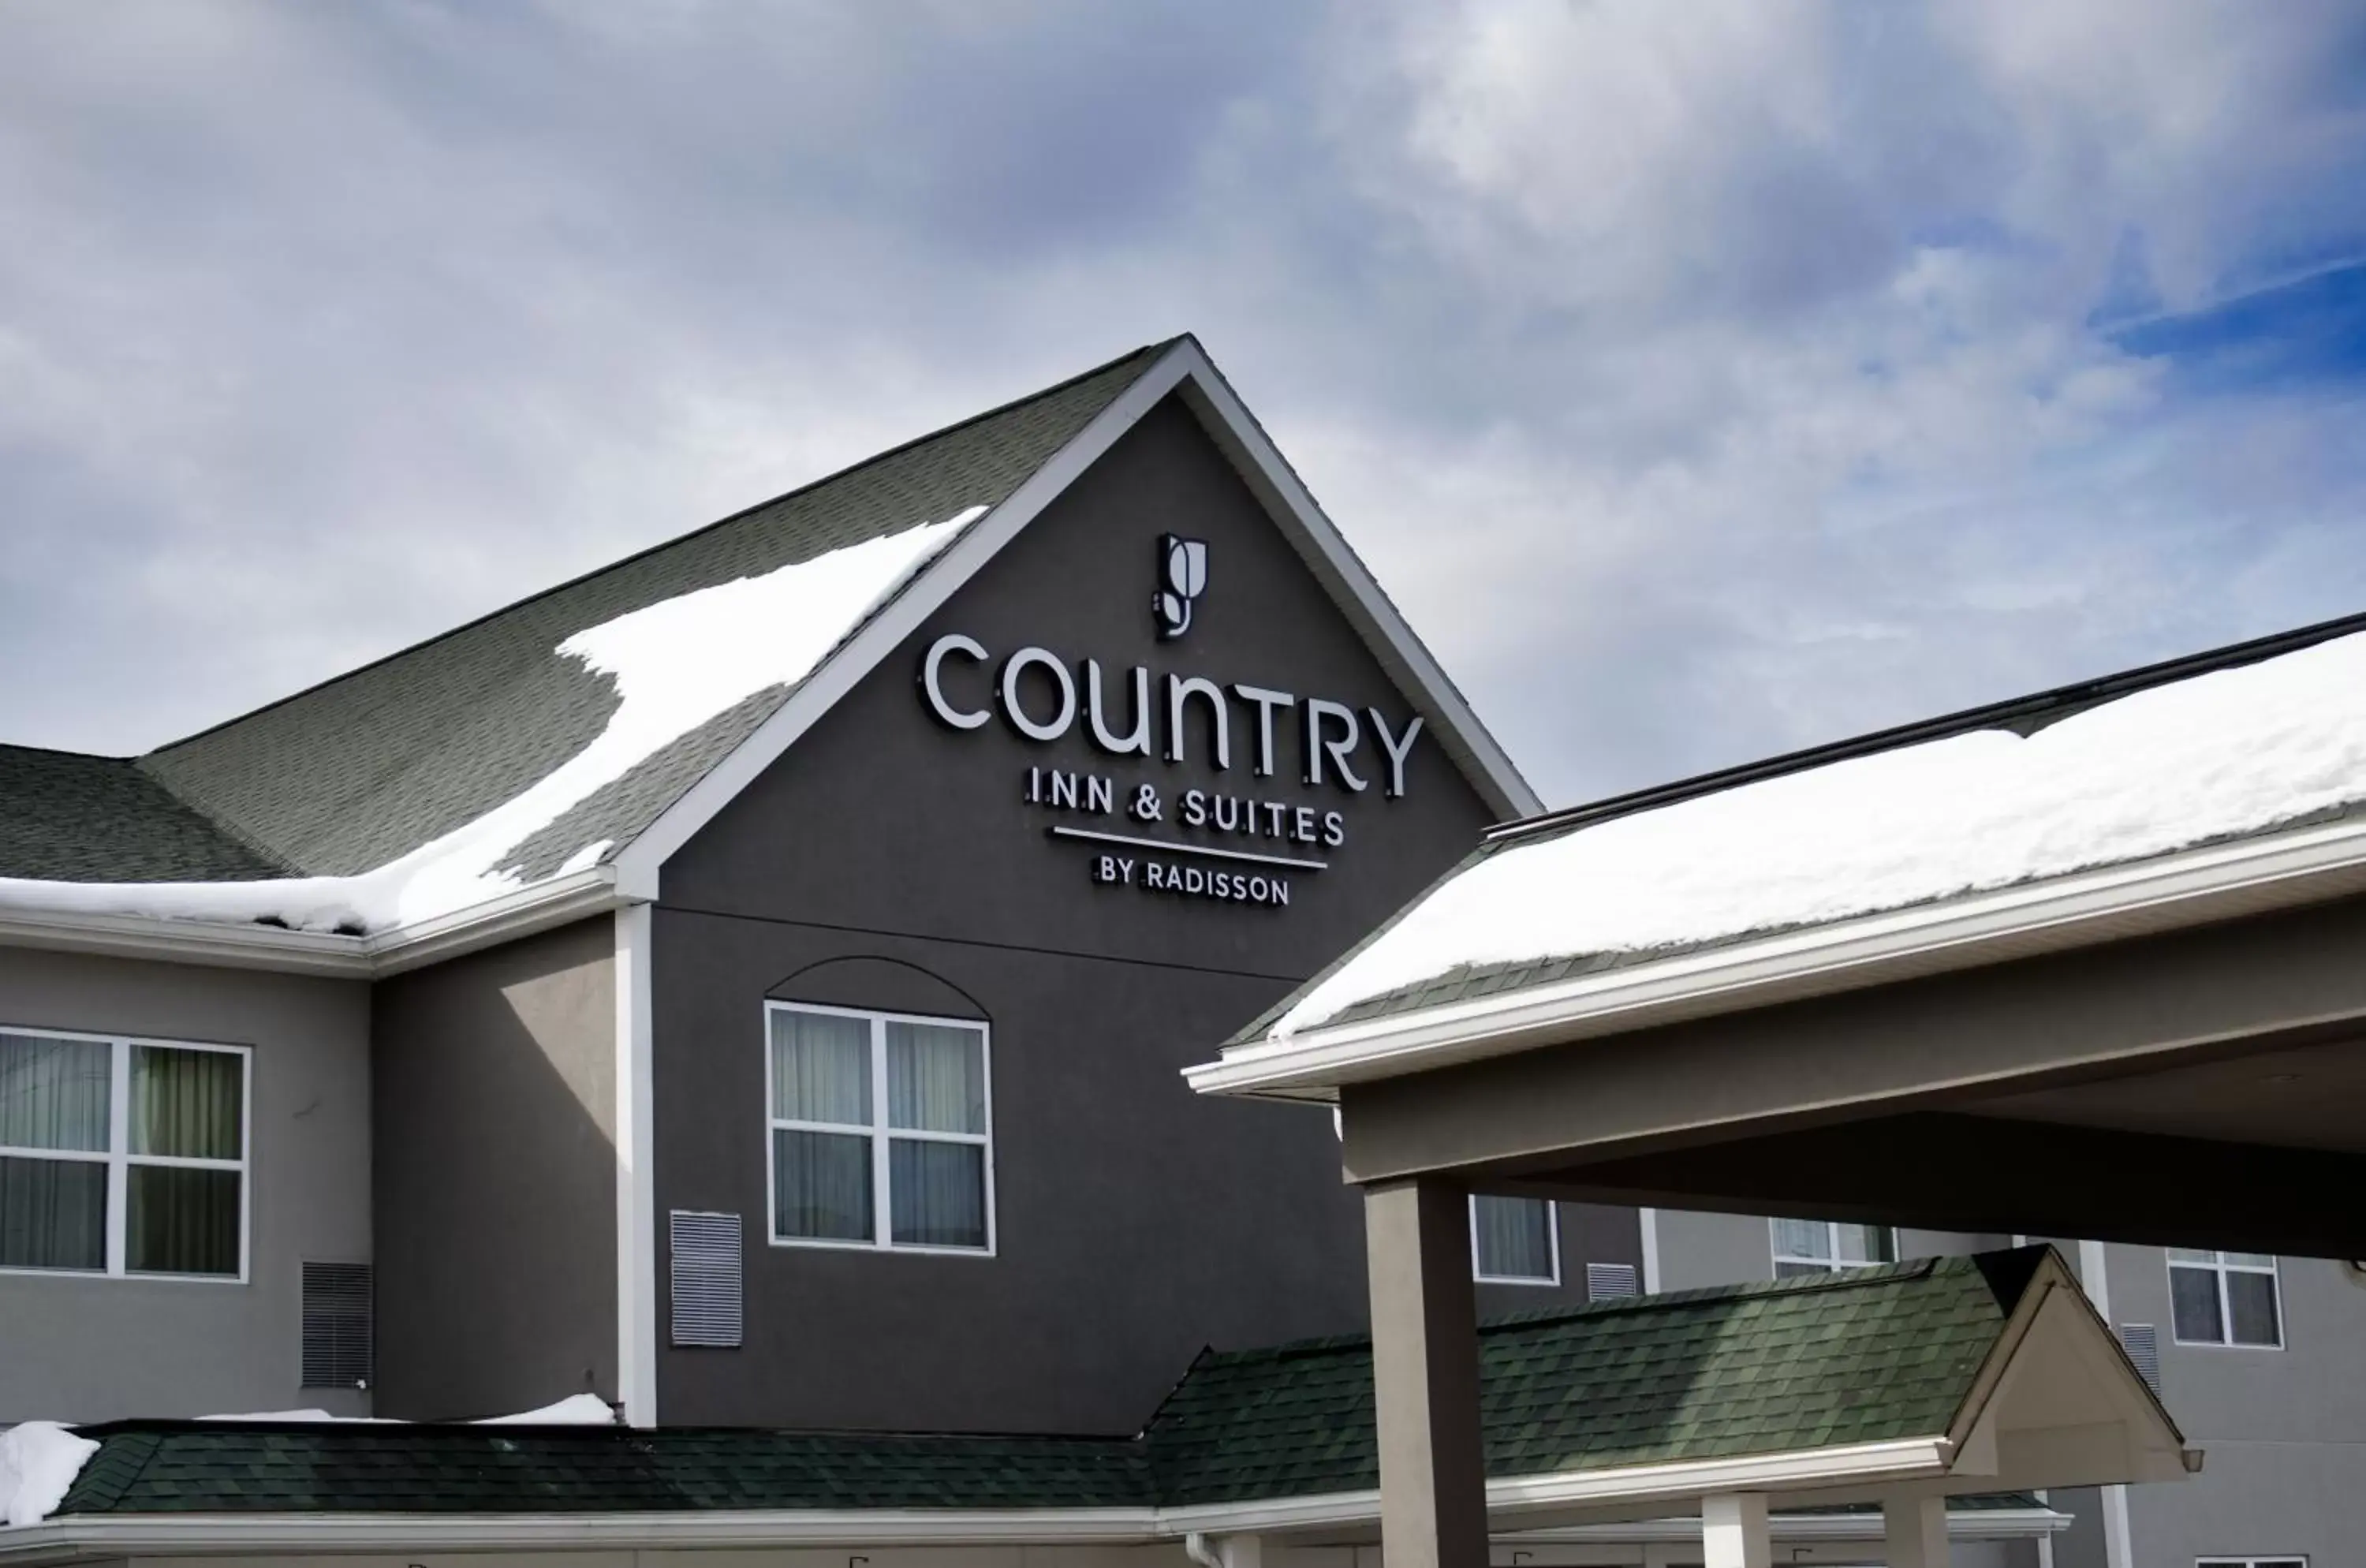 Property Building in Country Inn & Suites by Radisson, Ithaca, NY